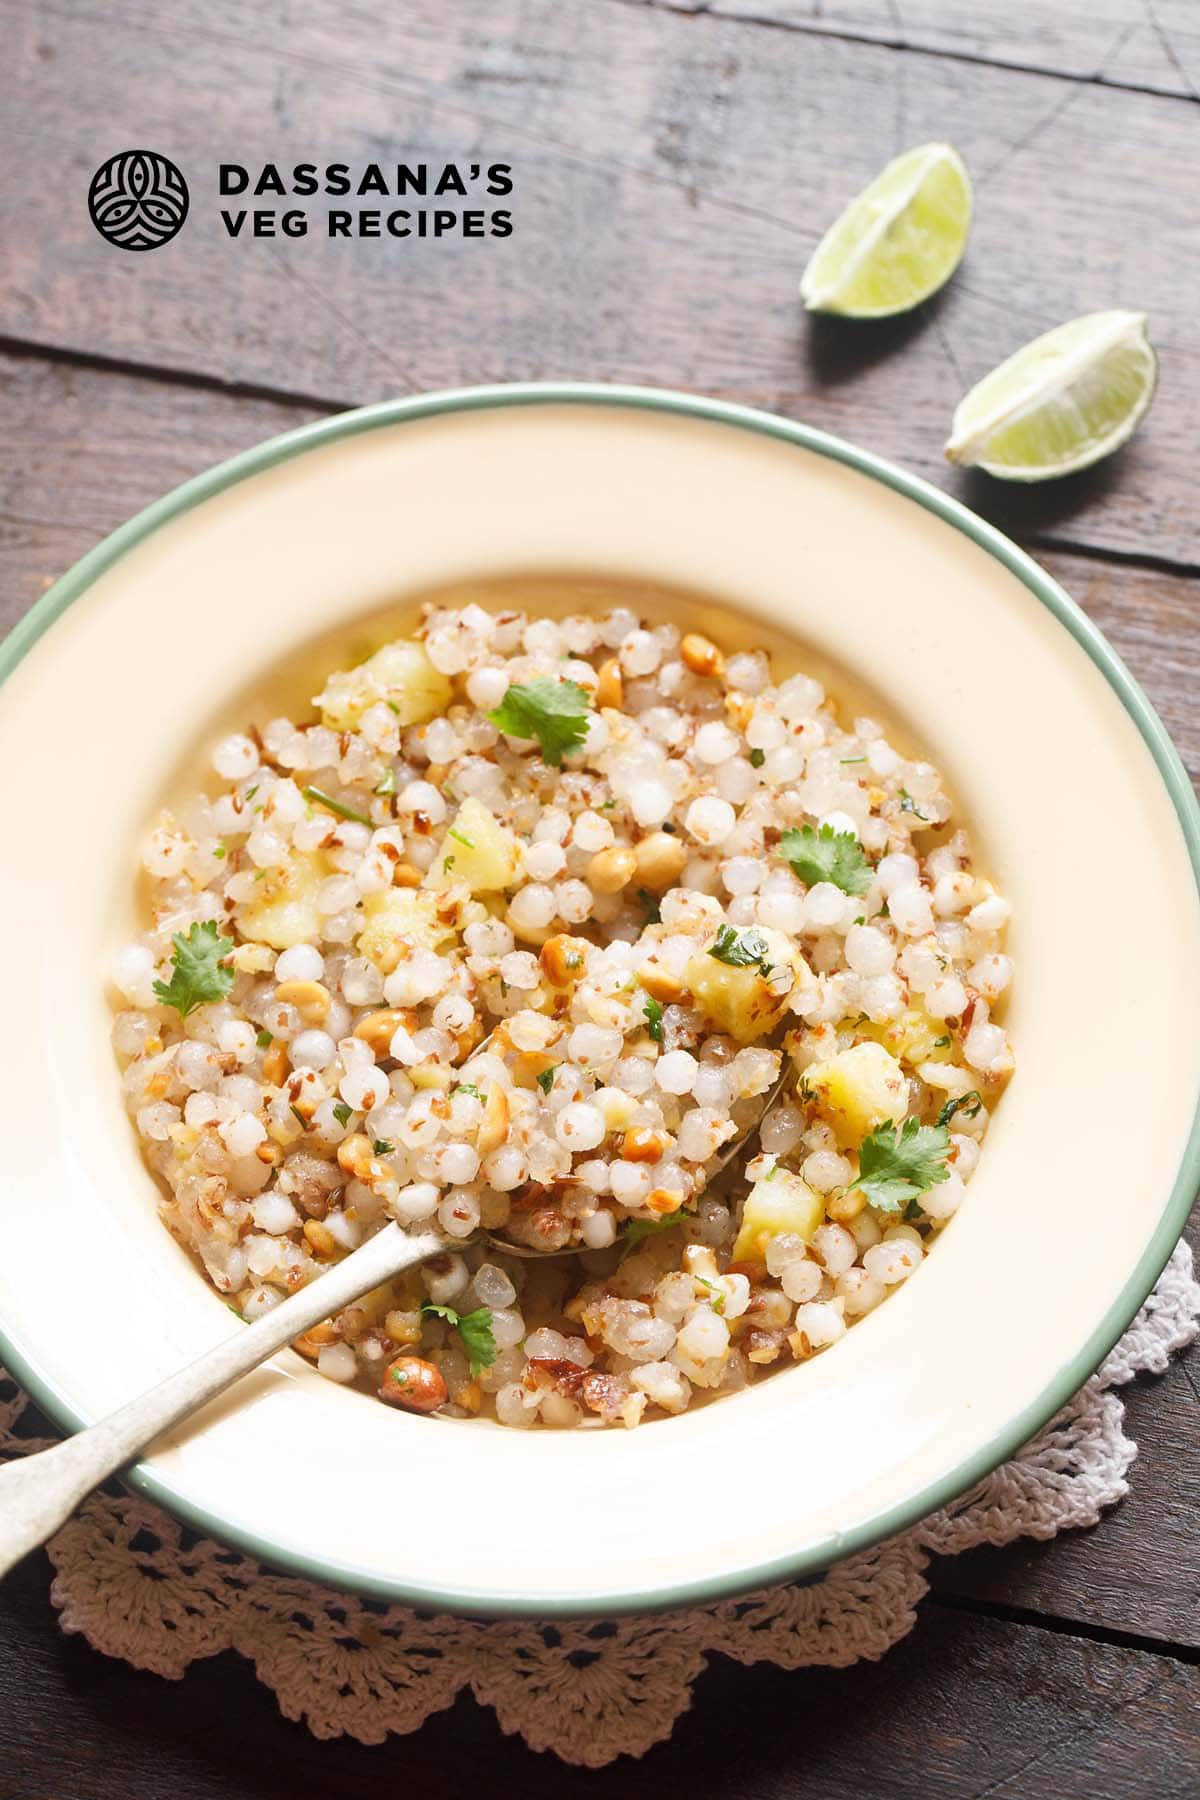 sabudana khichdi served in a green rimmed cream colored plate with a brass spoon and text layovers.